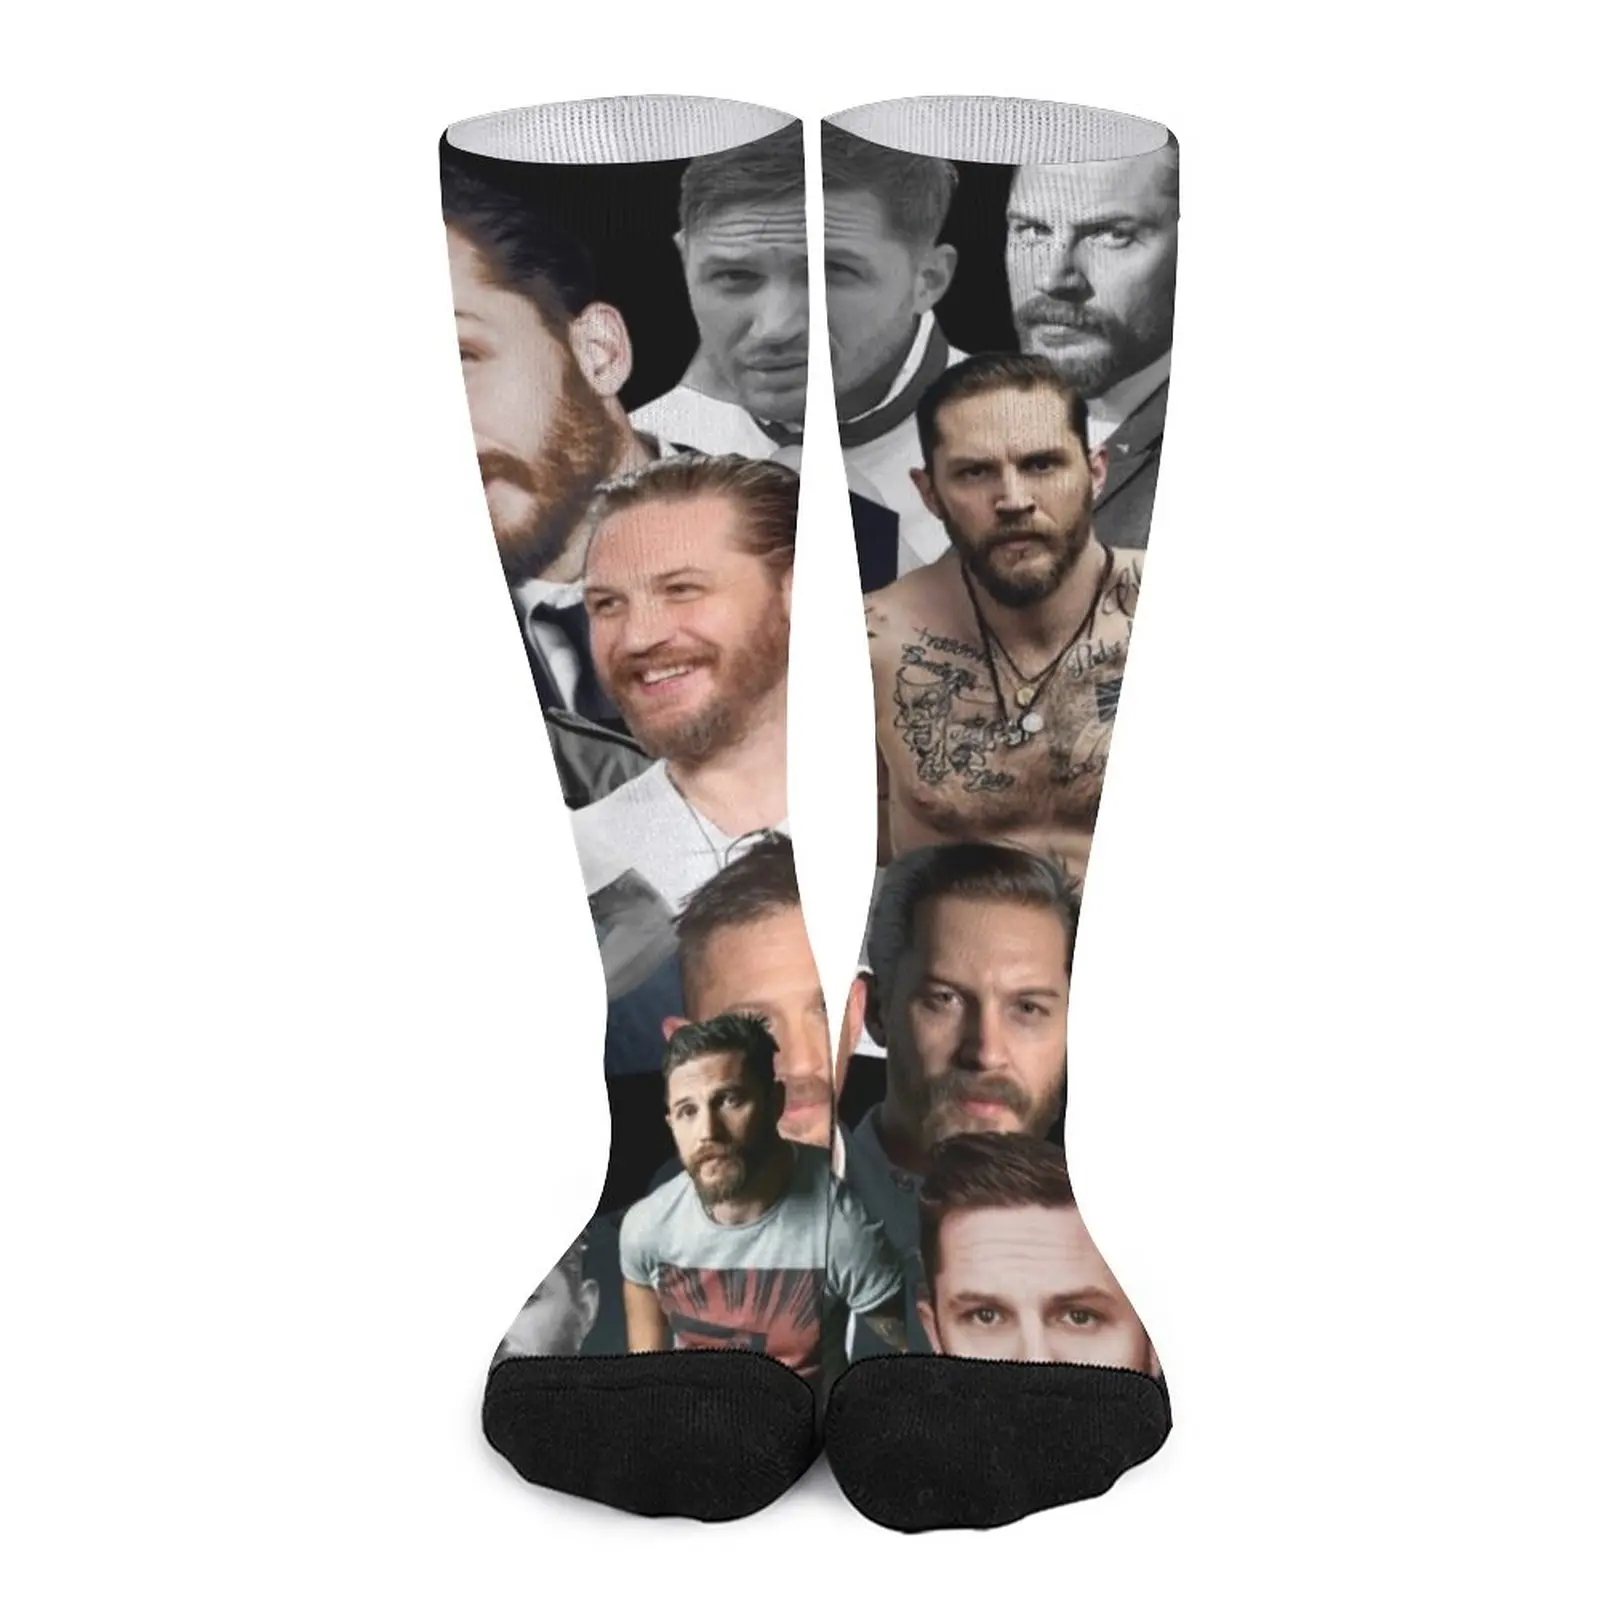 tom hardy photo collage Socks Sports socks socks for men Lots journamm butterfly floral stickers diy cut creative scrapbook supplies collage junk journal deco photo album aesthetics stickers